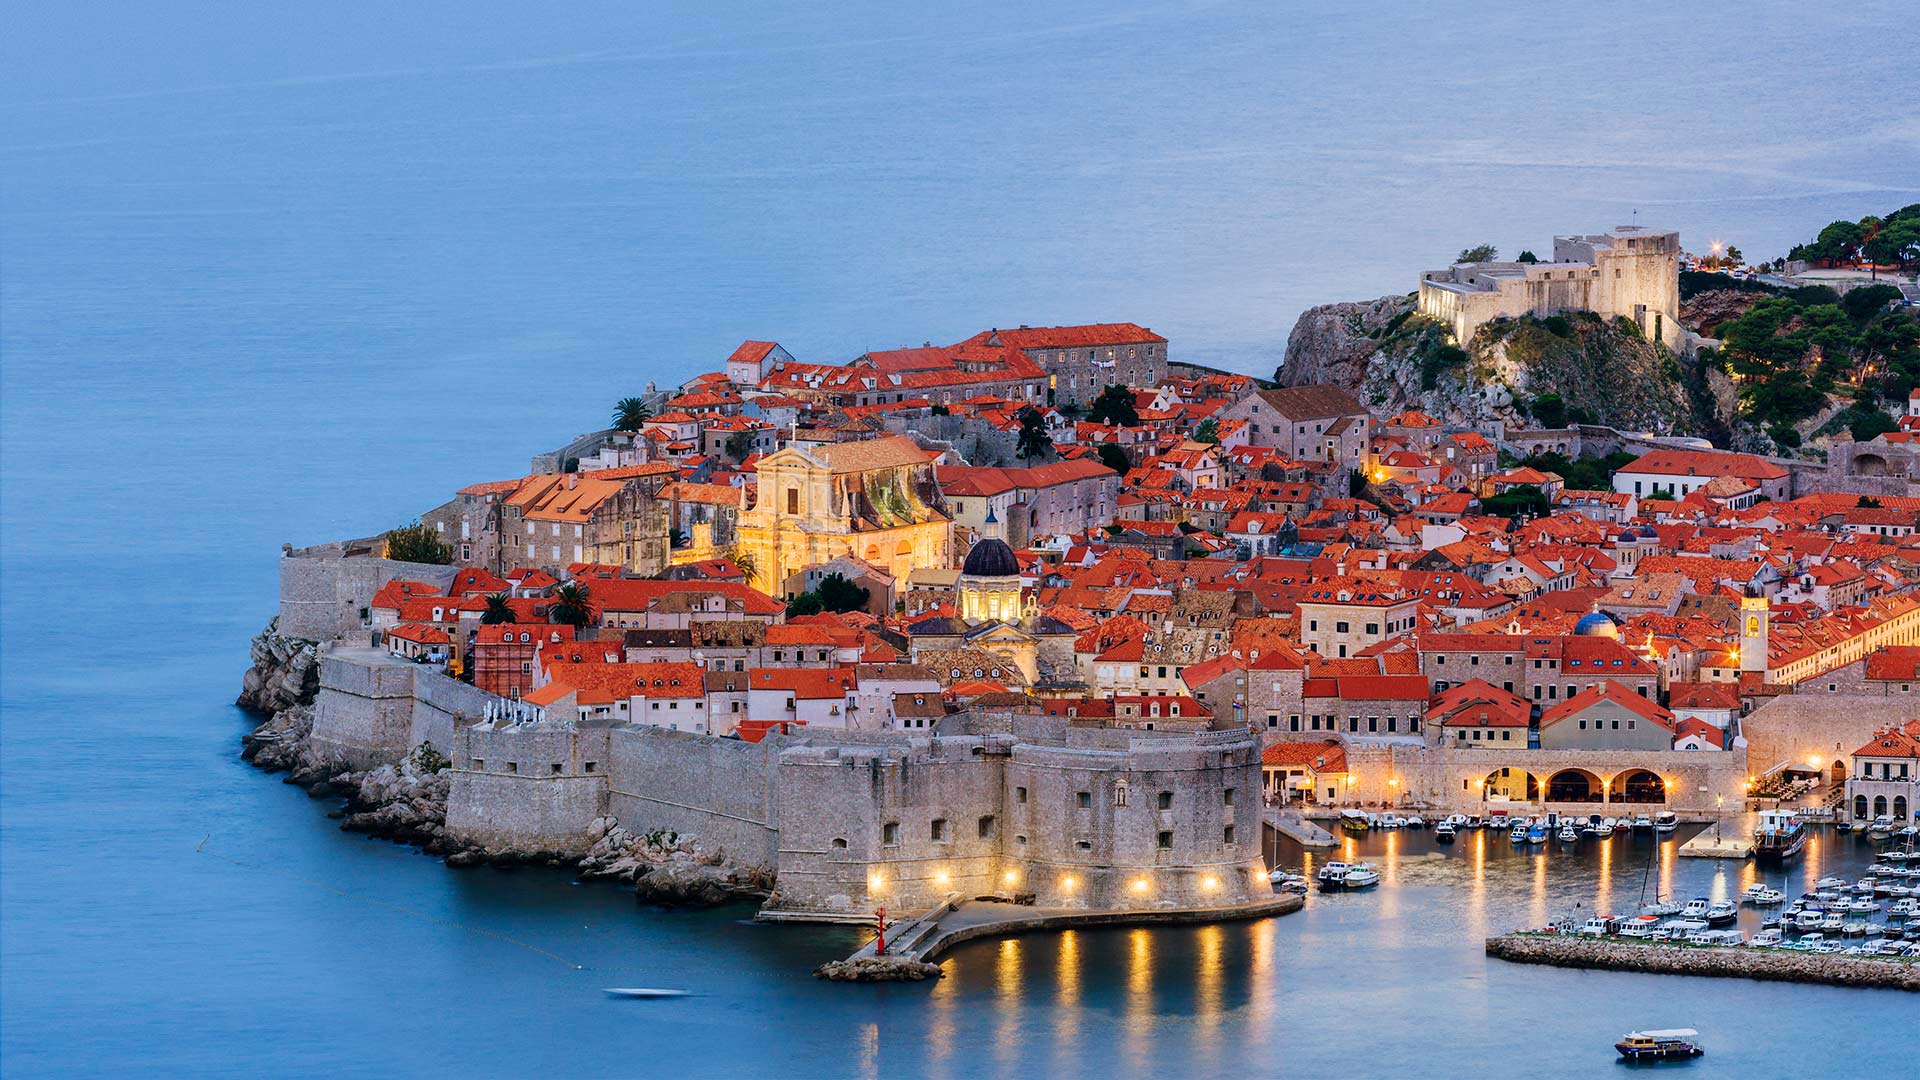 The Old Town of Dubrovnik, Croatia - Jeremy Woodhouse/Getty Images)